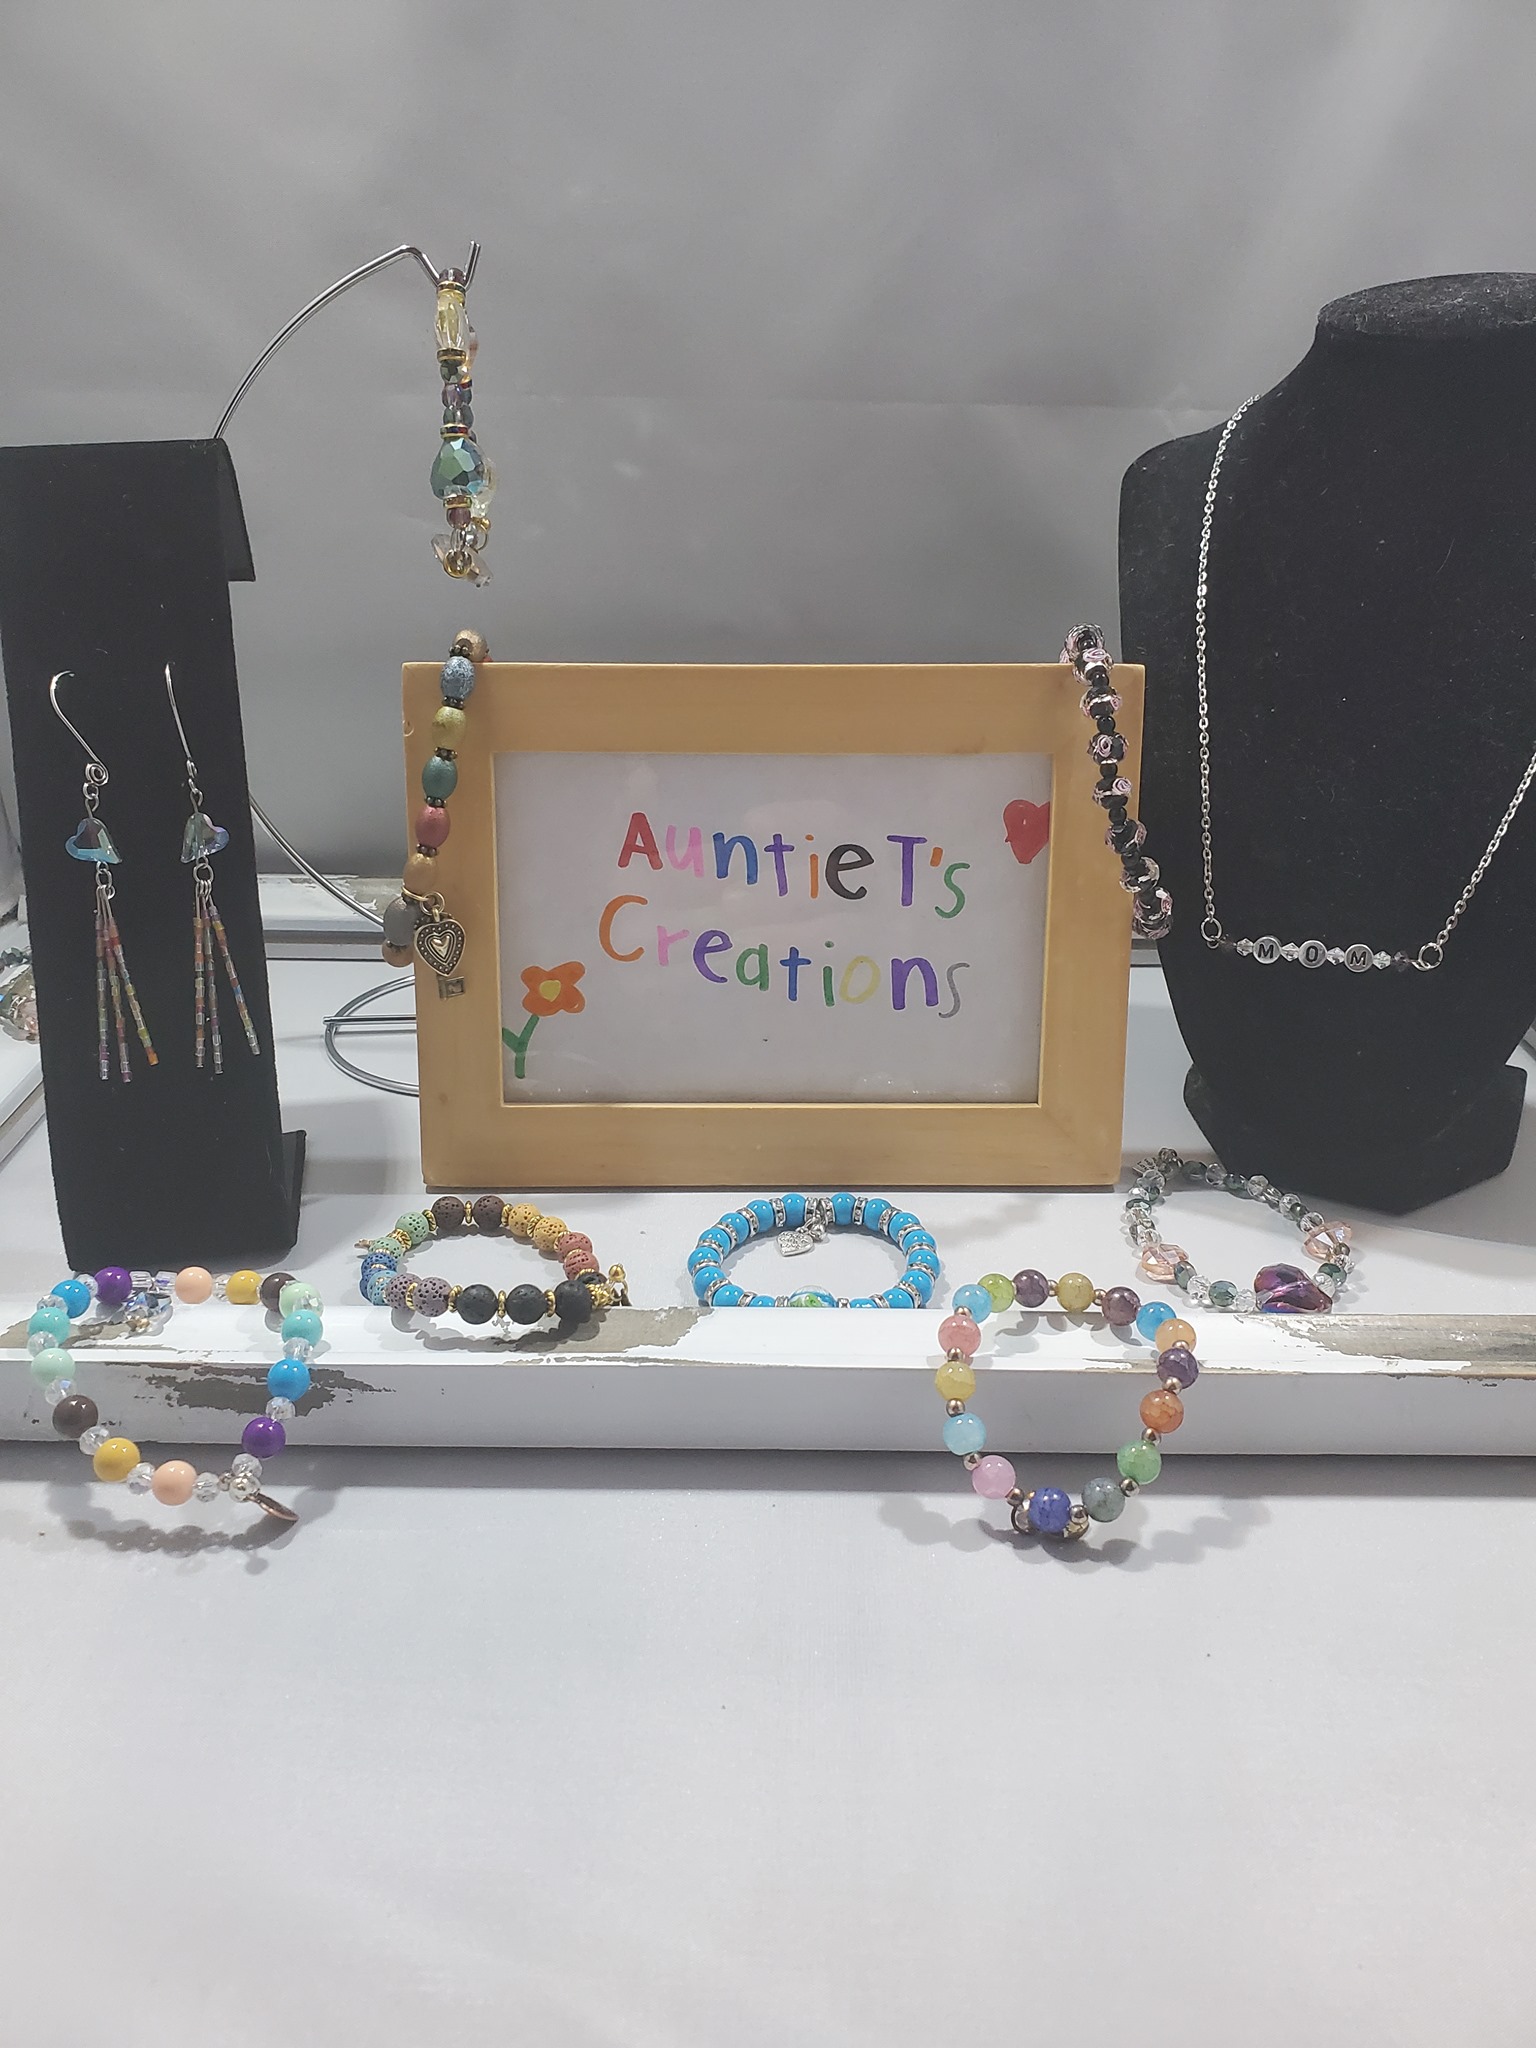 an Auntie T's creations sign surrounded by various bead jewelry